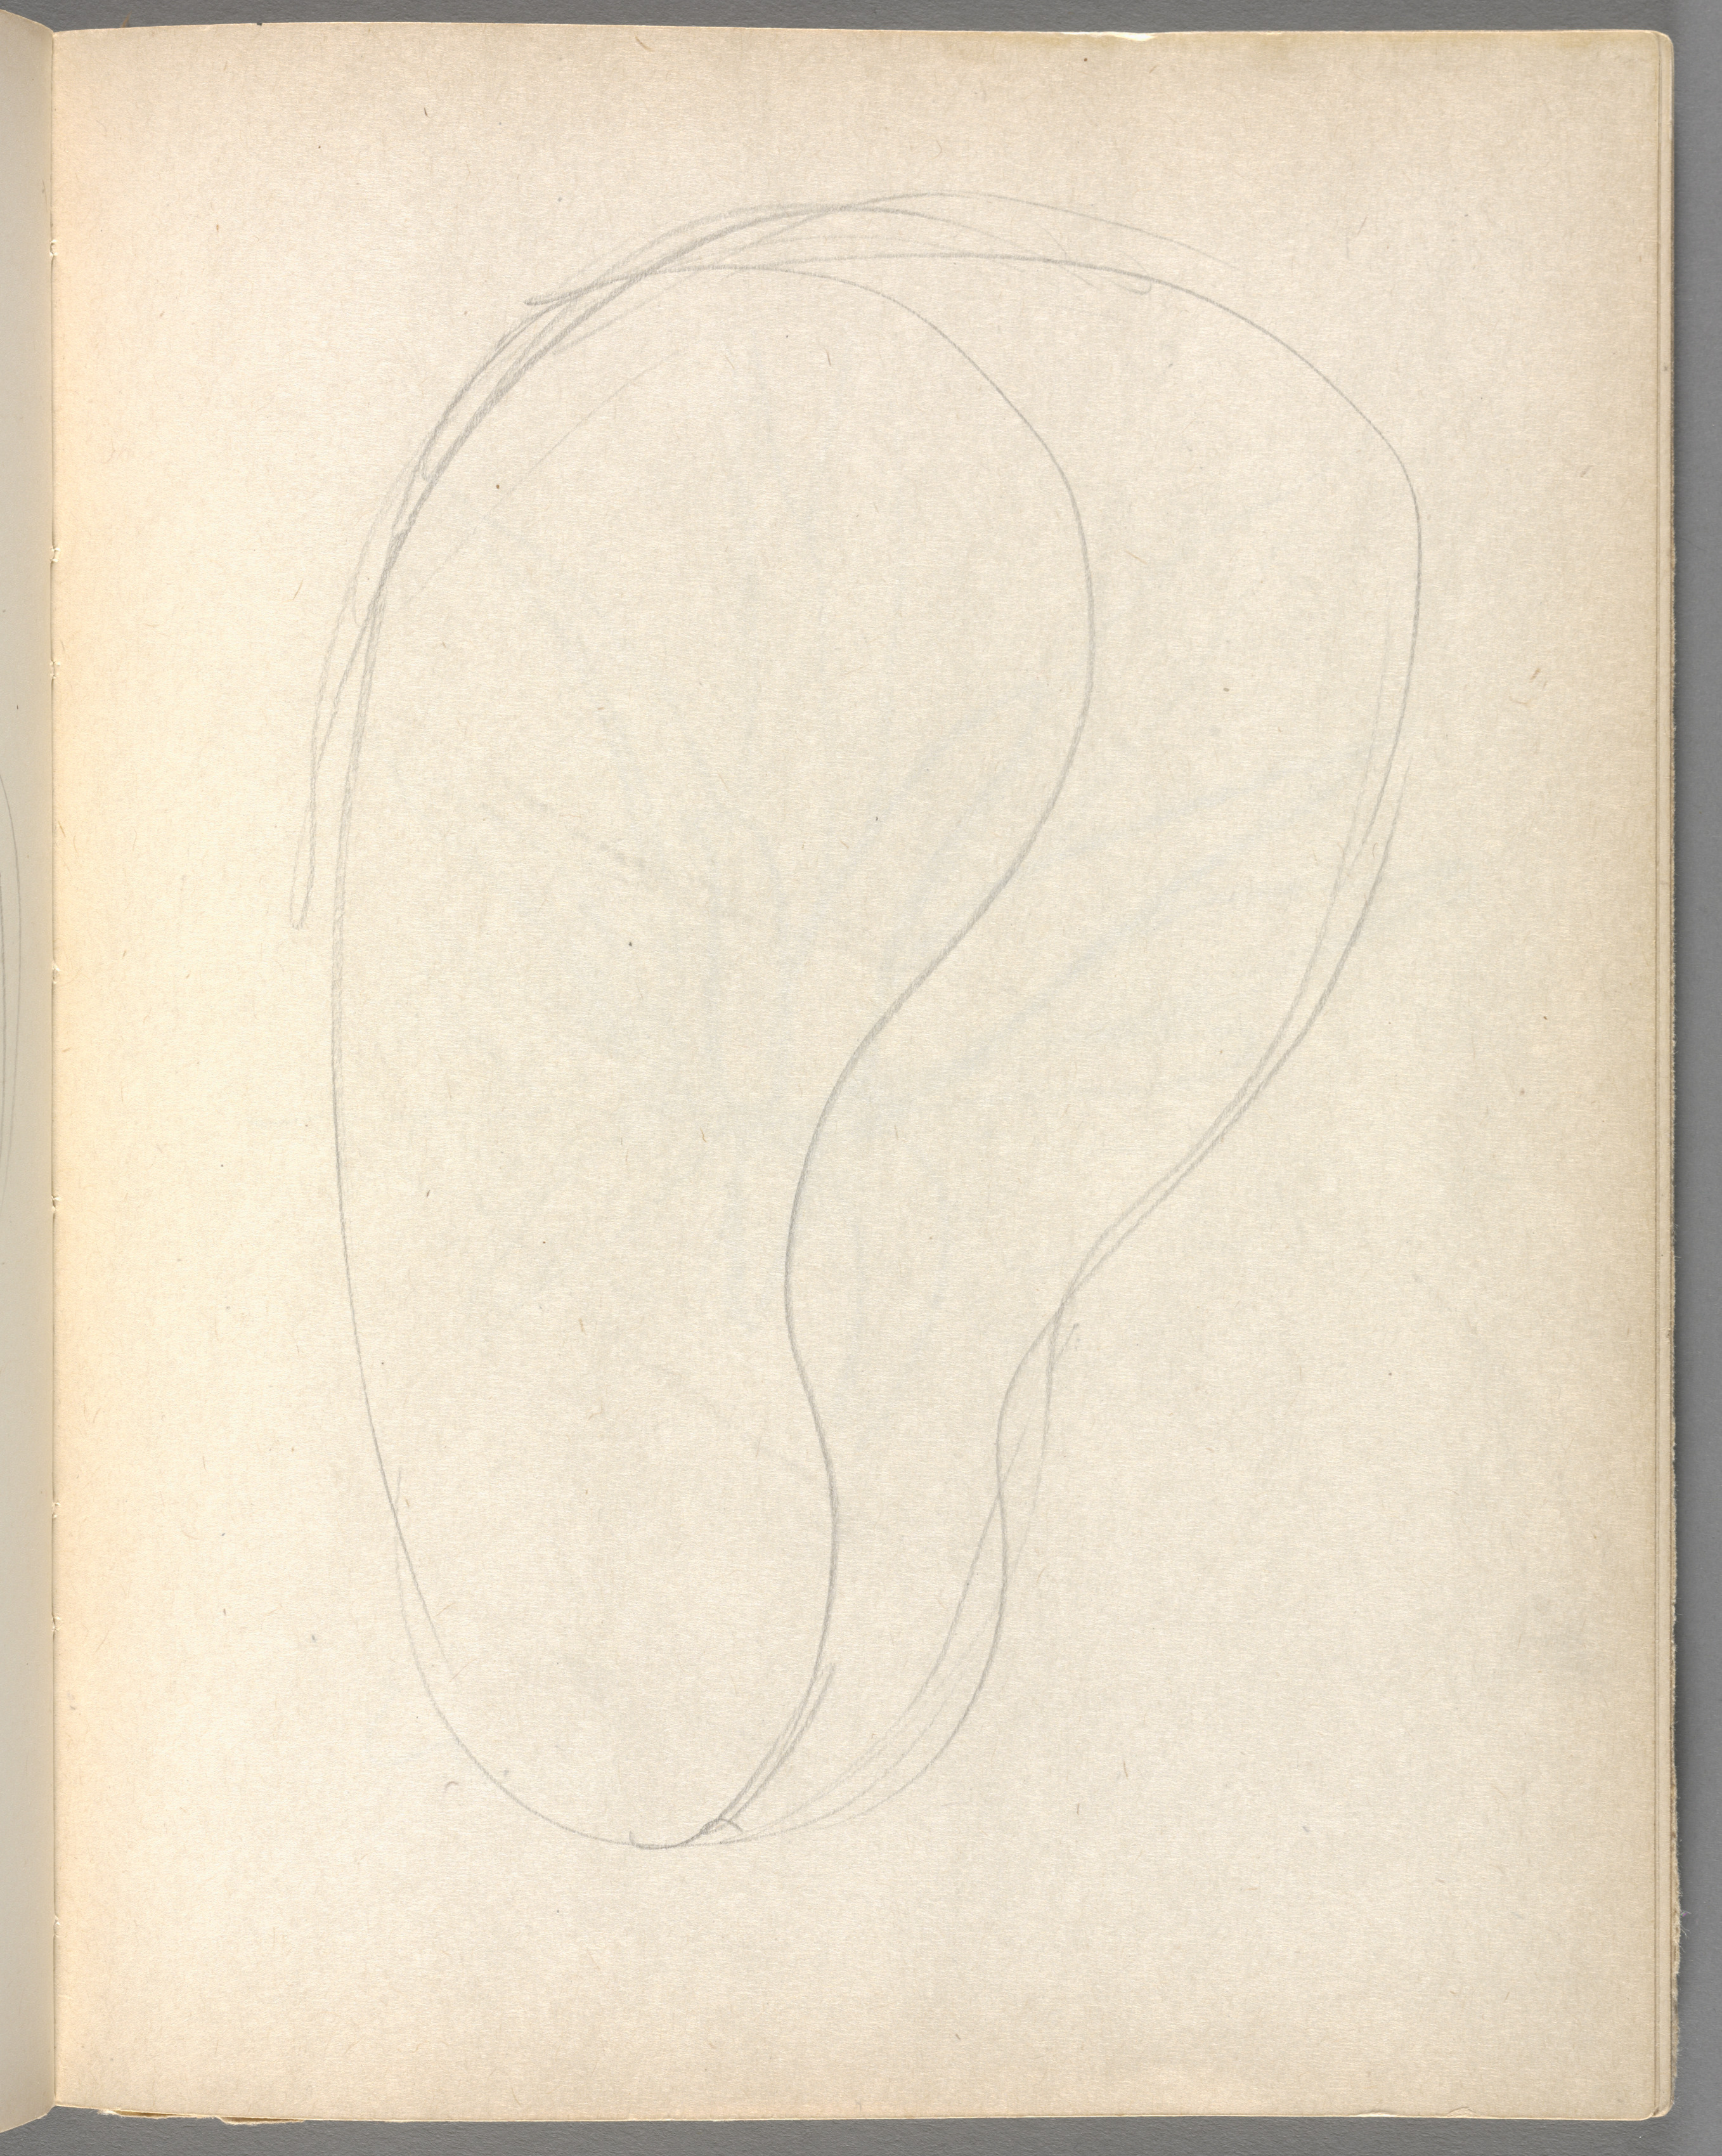 Sketchbook No. 6, page 119: Pencil two ovoid forms